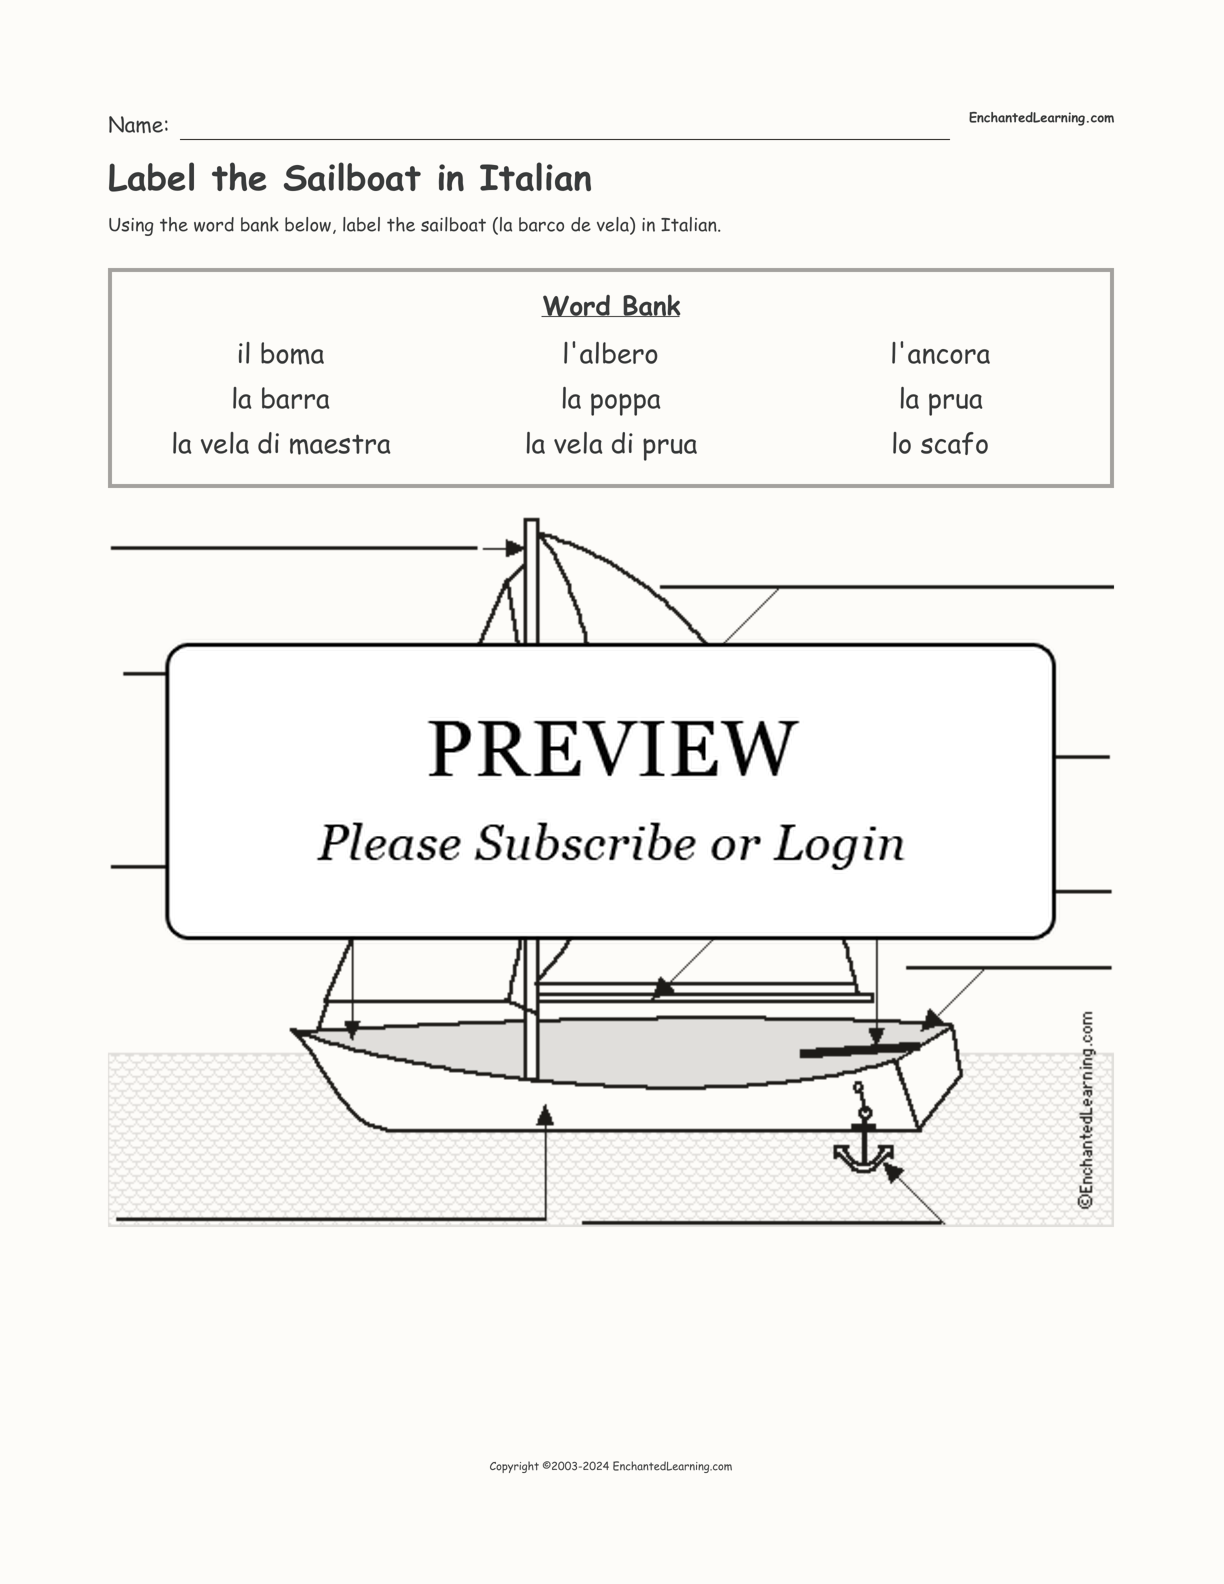 Label the Sailboat in Italian interactive worksheet page 1